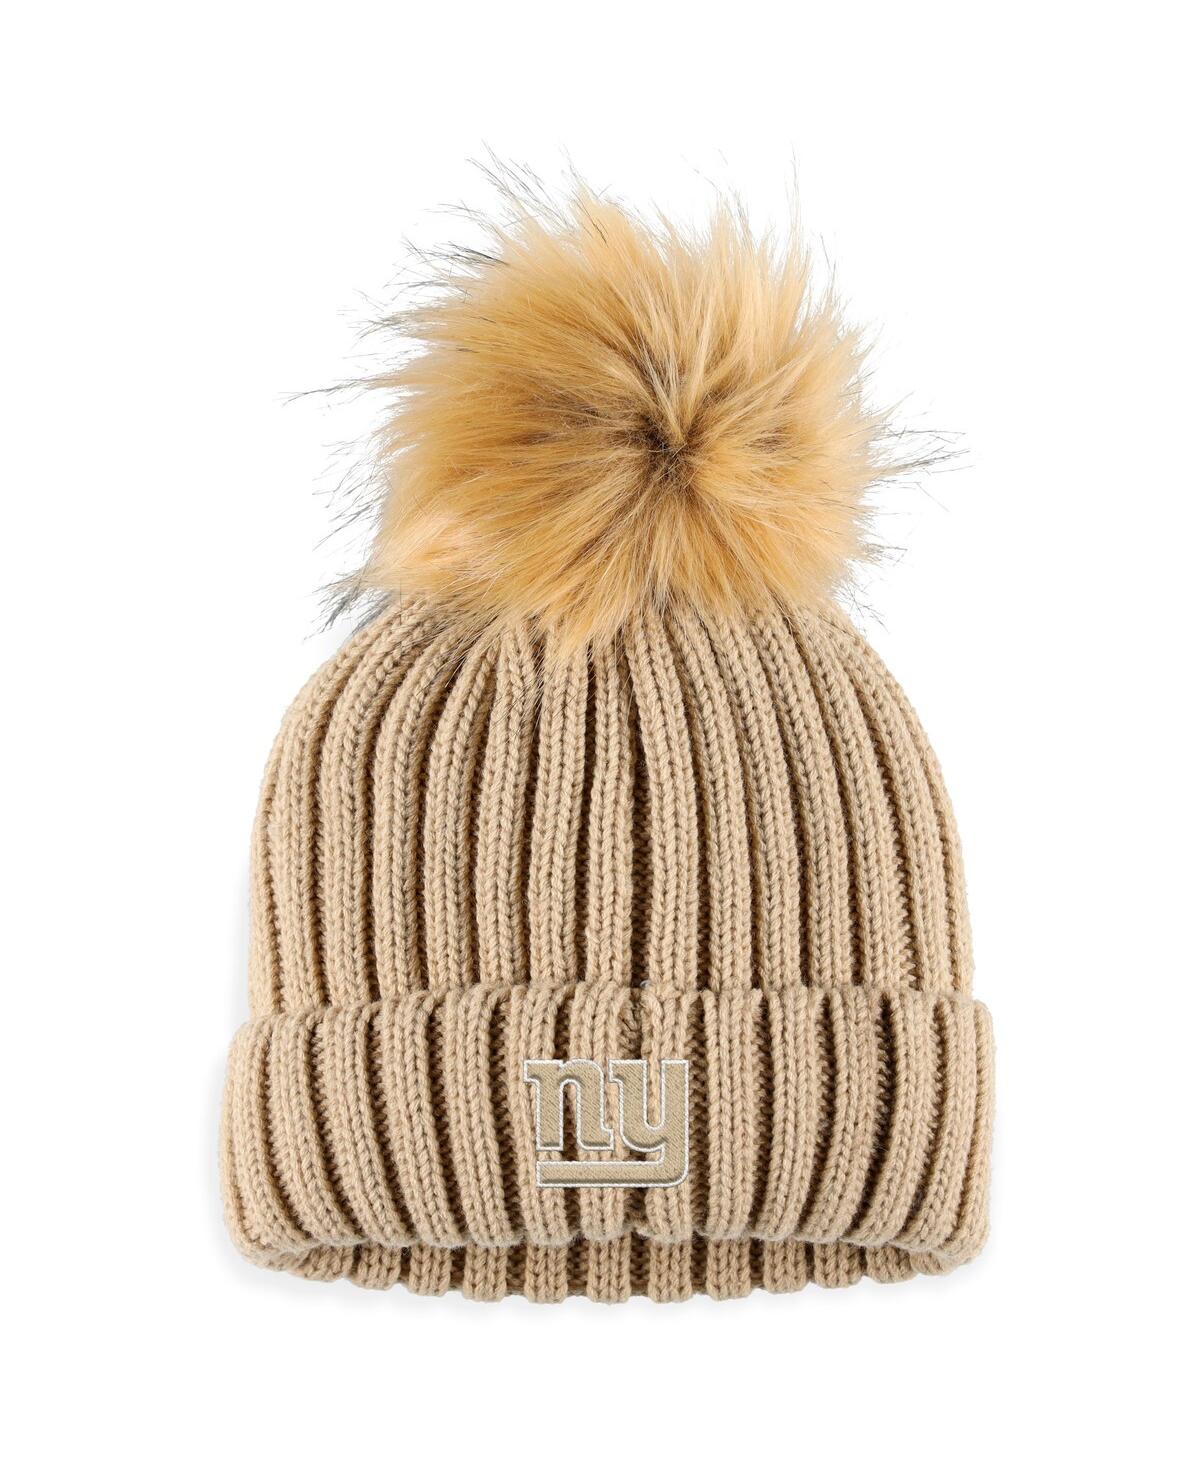 Wear By Erin Andrews Women's  Natural New York Giants Neutral Cuffed Knit Hat With Pom